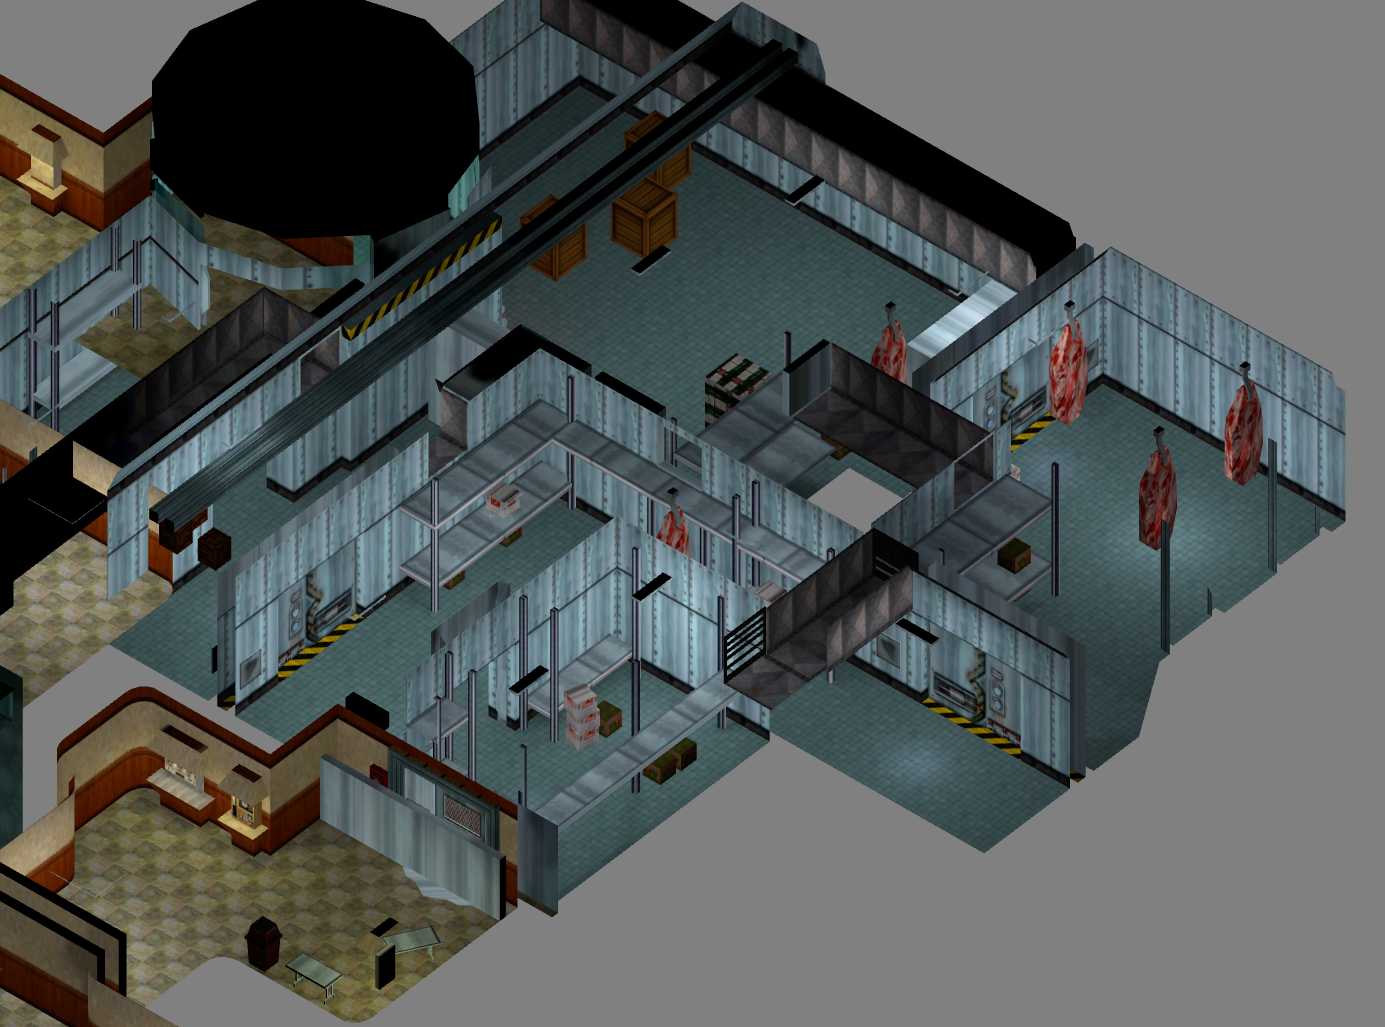 Half-Life Reimagined As An Isometric Game